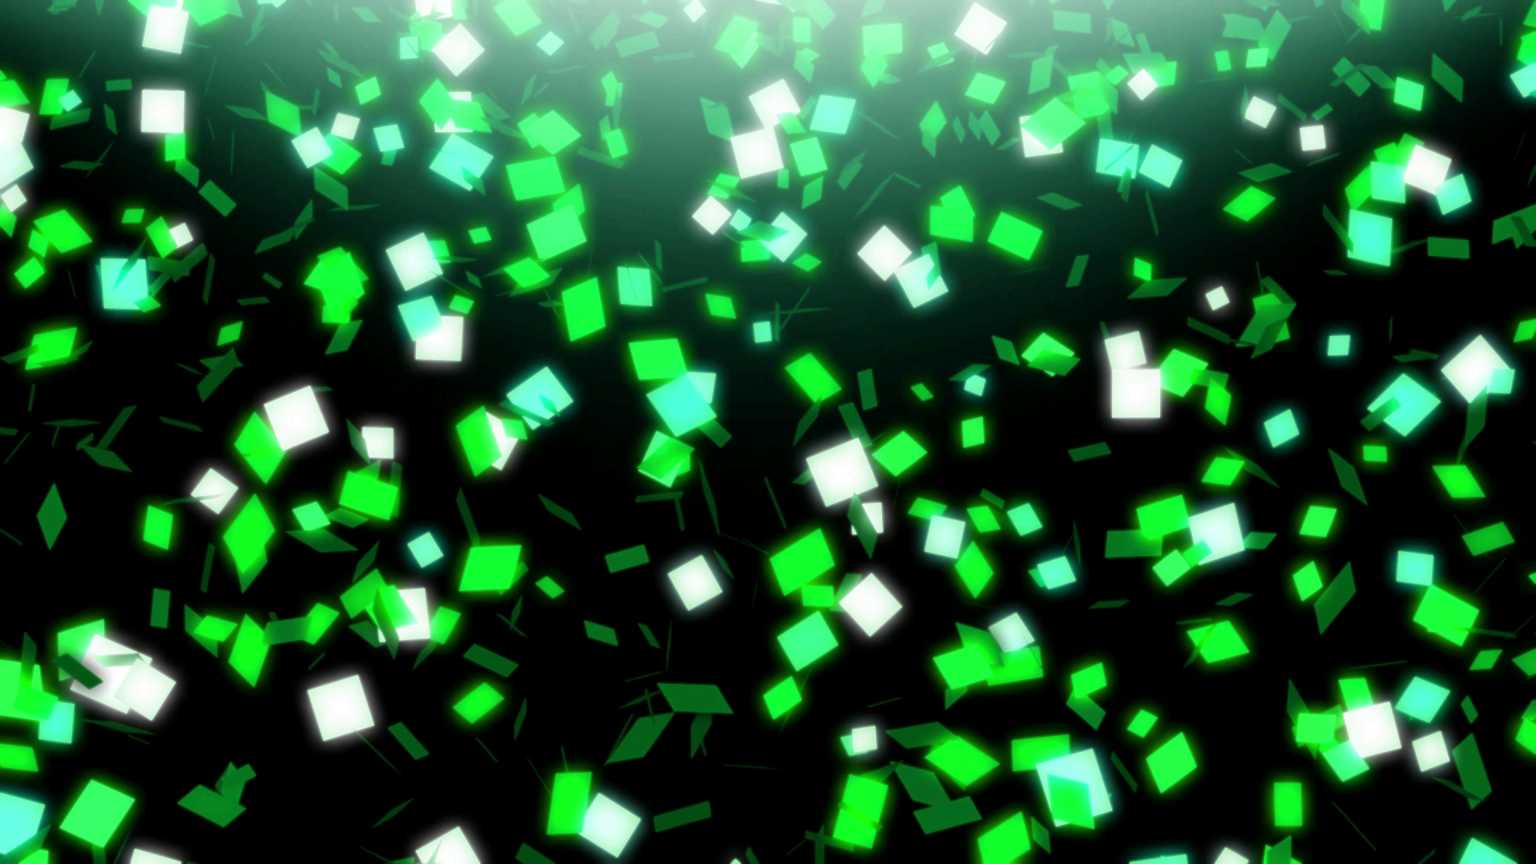 4K Green Particles Falling Motion Background || VFX Free To Use 4K Screensaver